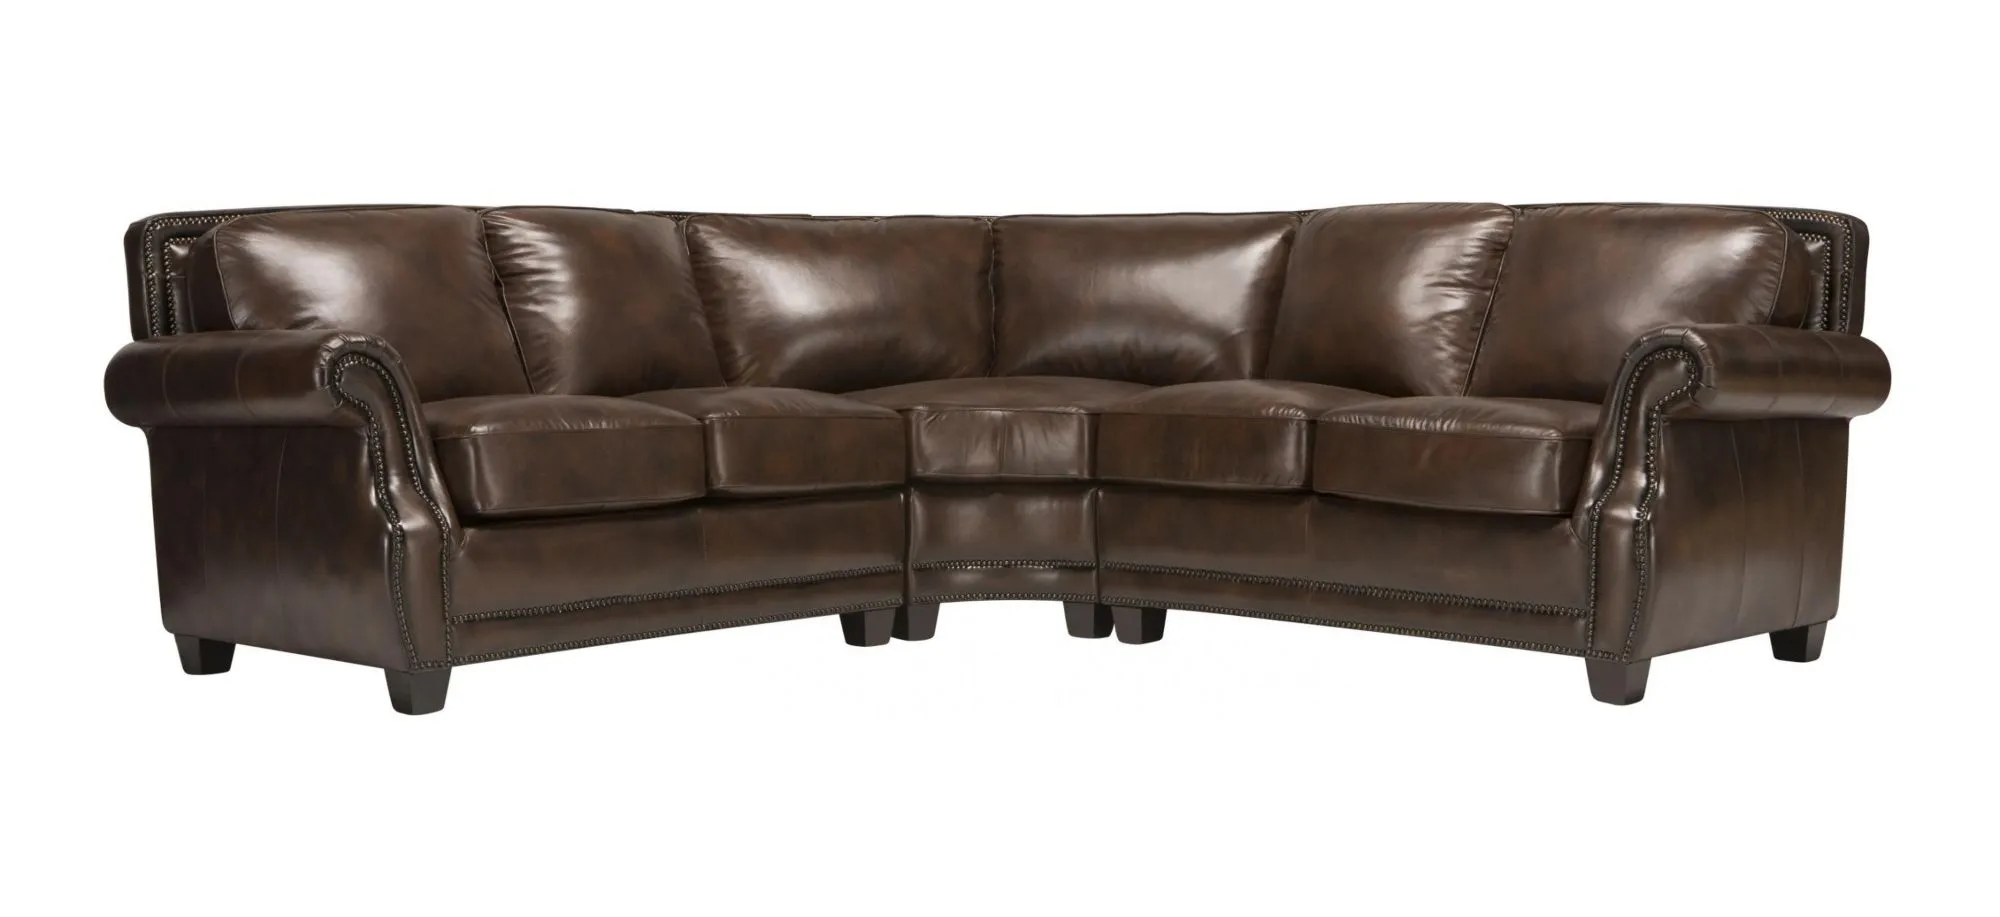 Romano 3-pc. Leather Sectional Sofa in Antique Tobacco by Bellanest